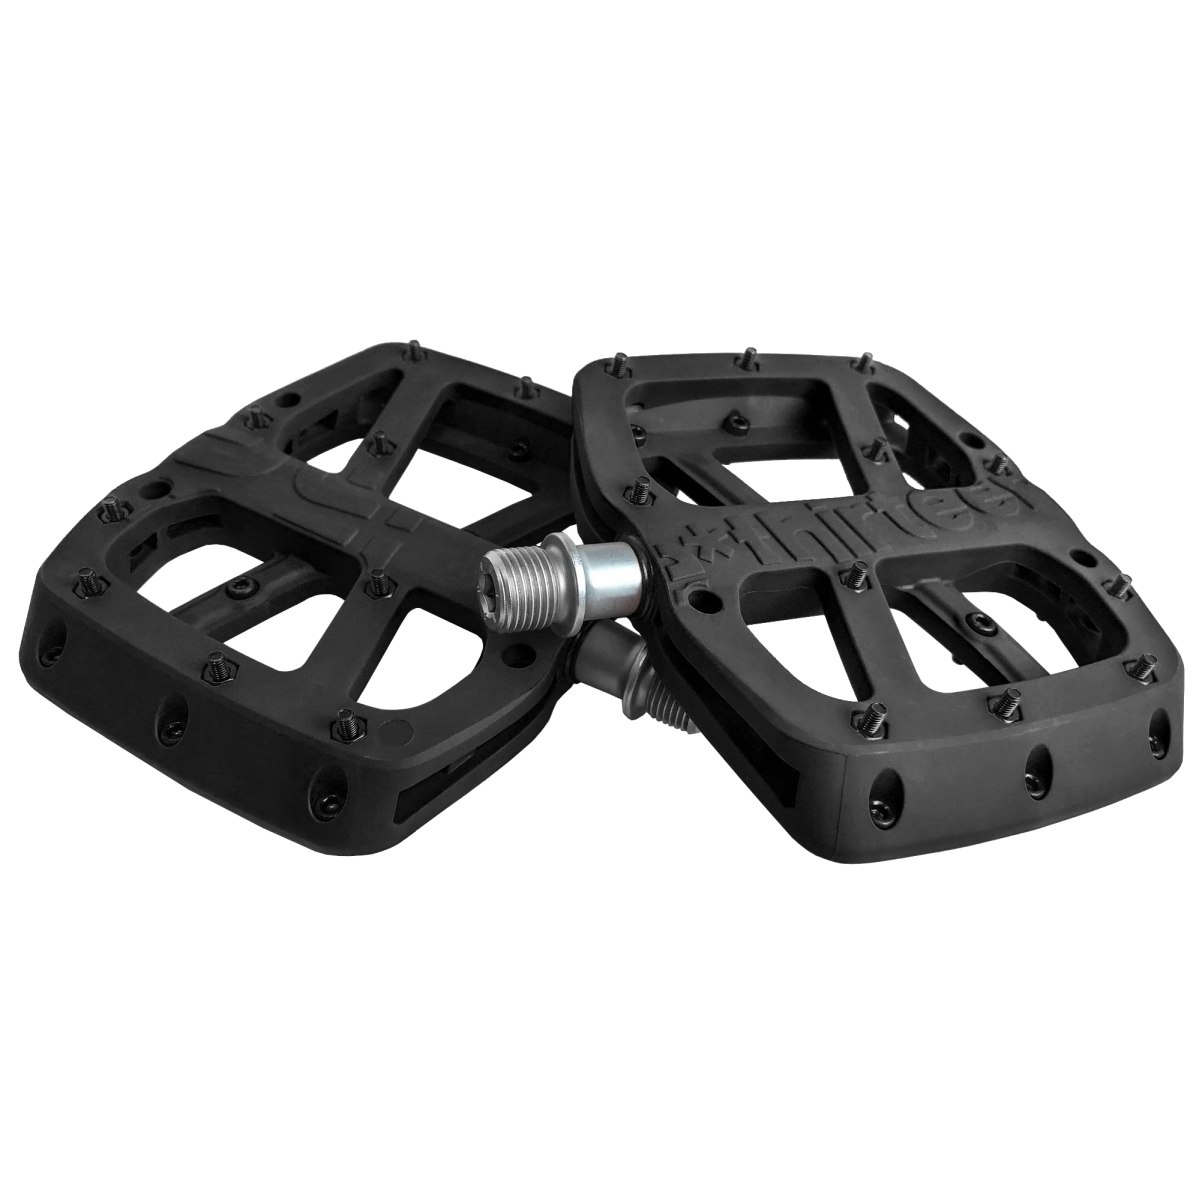 Picture of e*thirteen Base Flat Pedals - black